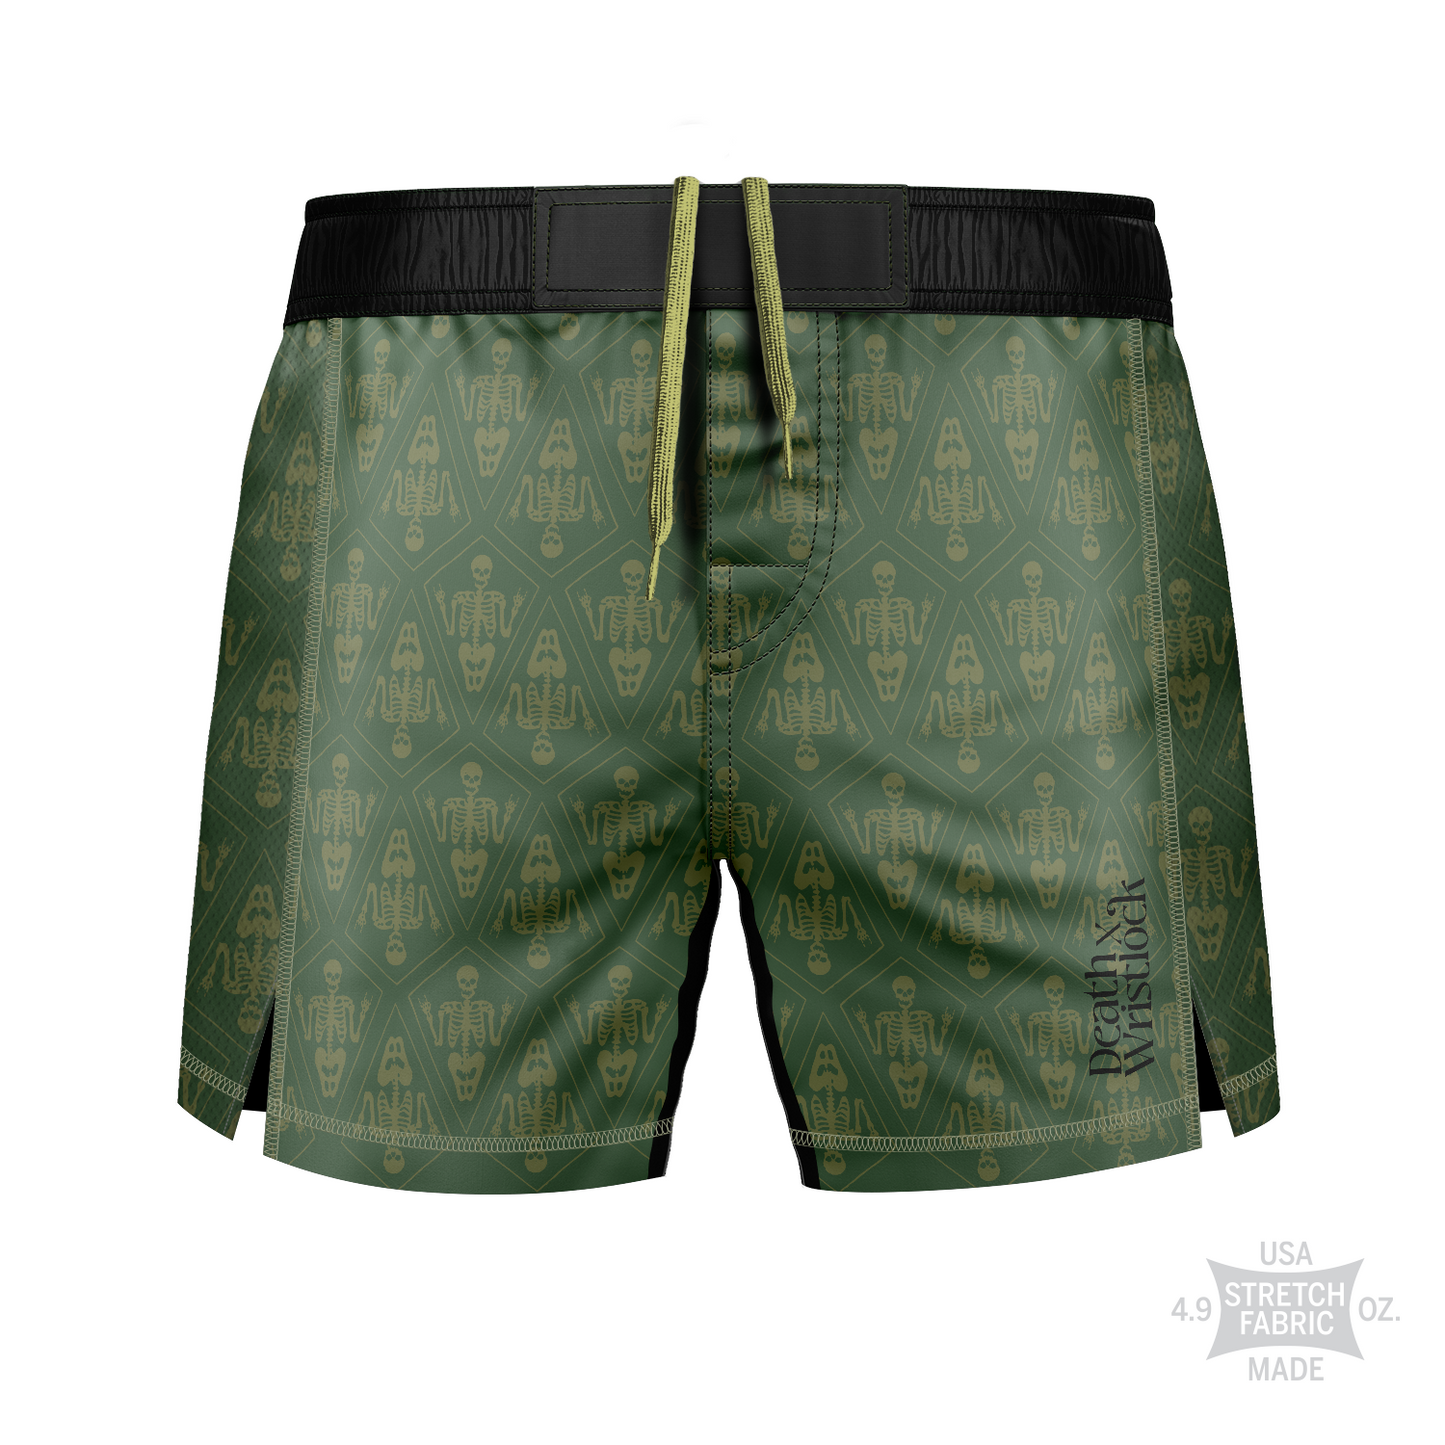 Death by Wristlock: Catacombs men's fight shorts, green